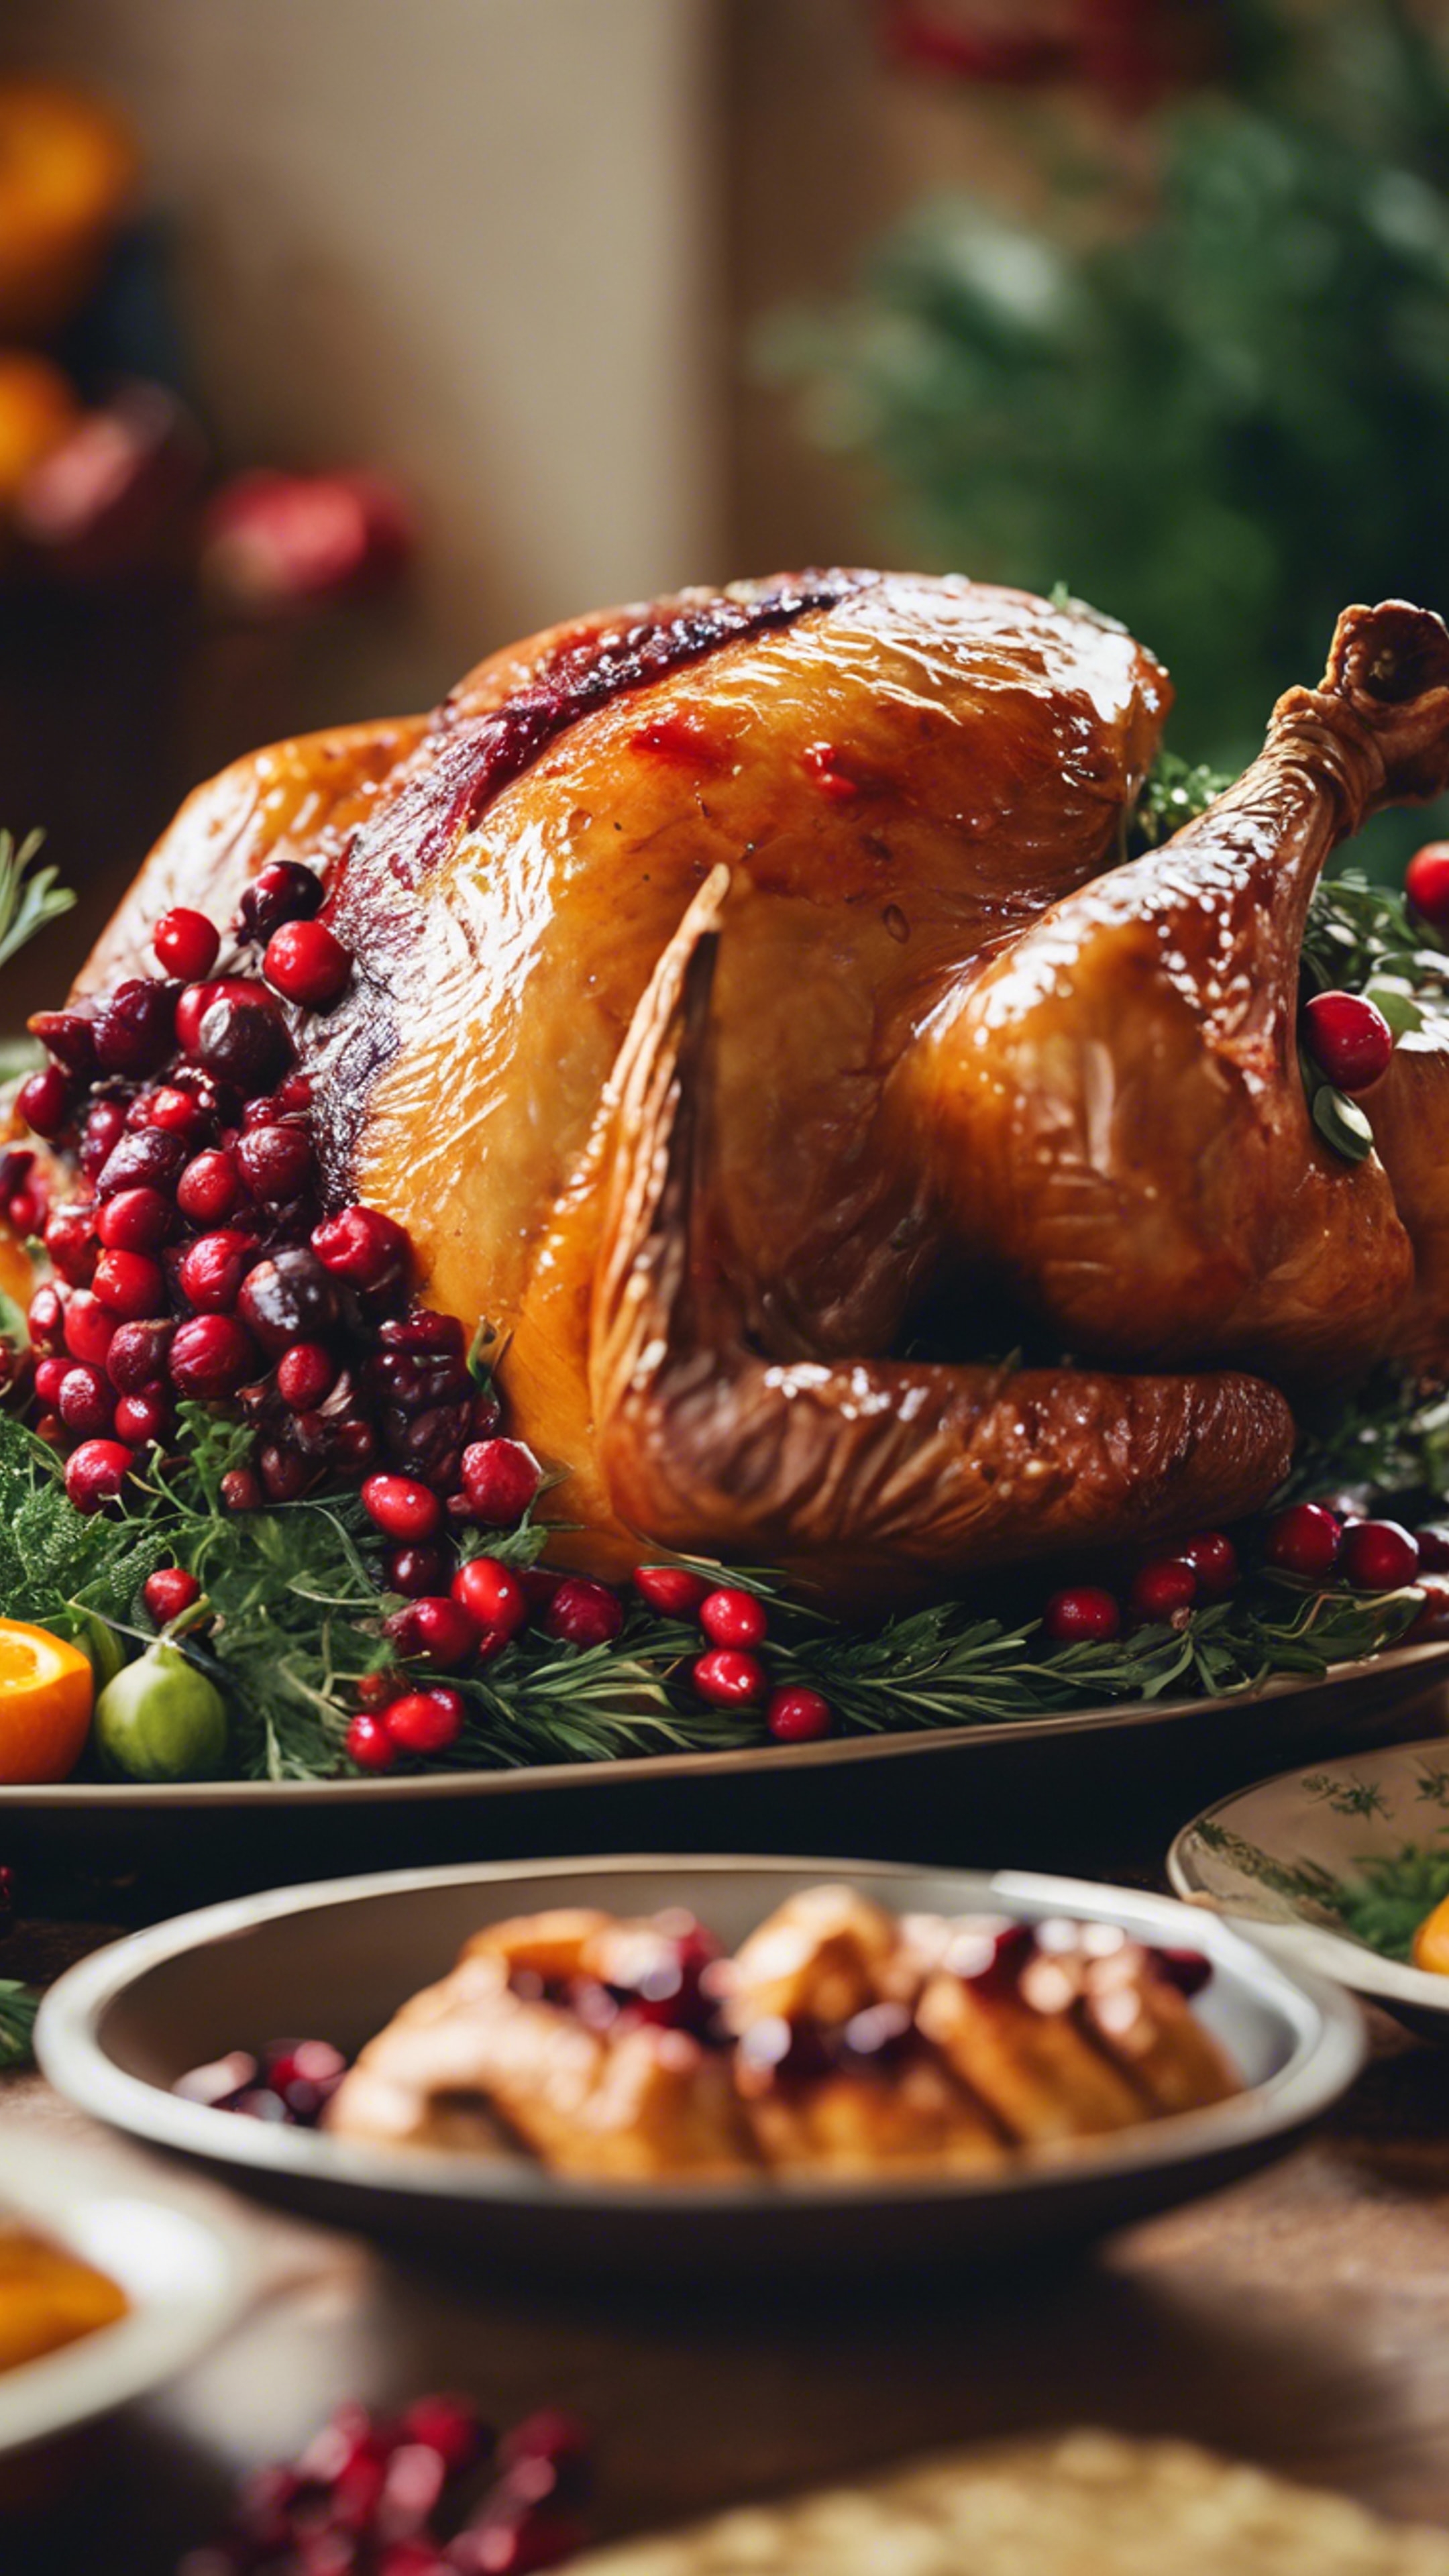 An artistic close-up of a traditional roast turkey on a Thanksgiving table, garnished with cranberries and herbs. Обои[f7ada081b7d5471b890d]